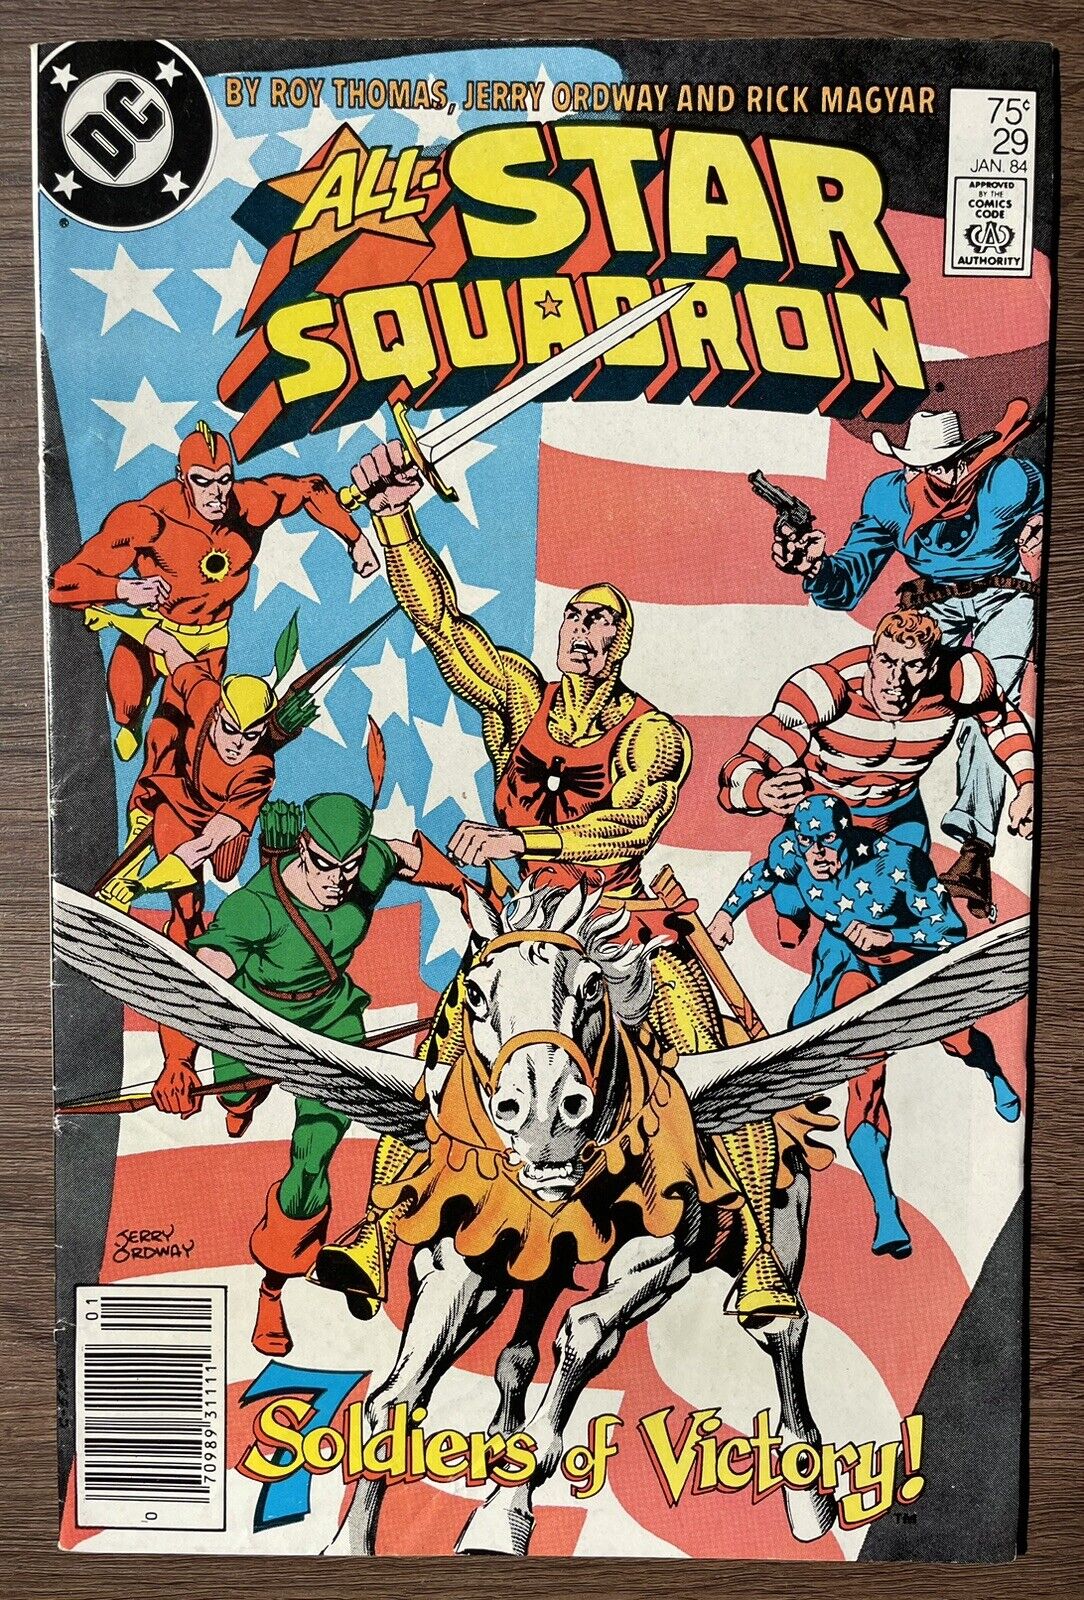 ALL-STAR SQUADRON #29 (DC Comics 1984) 7 Soldiers of Victory • NEWSSTAND • VG/FN